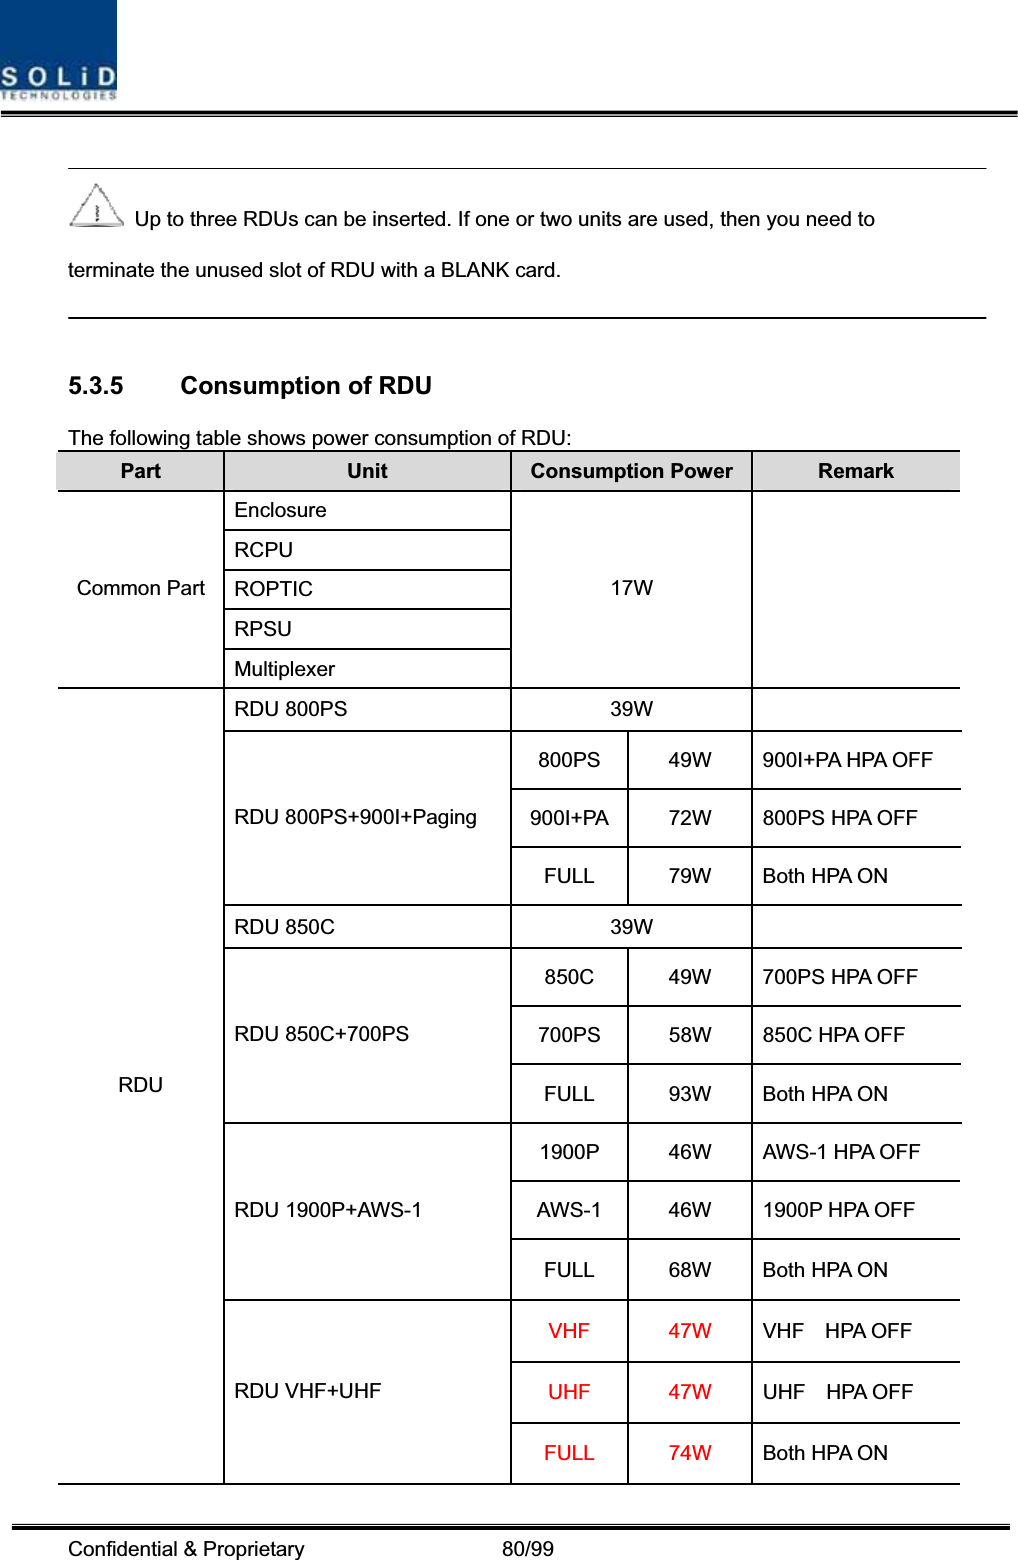 Confidential &amp; Proprietary                   80/99   Up to three RDUs can be inserted. If one or two units are used, then you need to terminate the unused slot of RDU with a BLANK card. 5.3.5  Consumption of RDU The following table shows power consumption of RDU: Part Unit Consumption Power  Remark Enclosure RCPU ROPTICRPSUCommon Part Multiplexer17W  RDU 800PS  39W   800PS  49W  900I+PA HPA OFF 900I+PA 72W 800PS HPA OFF RDU 800PS+900I+Paging FULL  79W  Both HPA ON RDU 850C  39W   850C 49W 700PS HPA OFF 700PS  58W  850C HPA OFF RDU 850C+700PS FULL  93W  Both HPA ON 1900P  46W  AWS-1 HPA OFF AWS-1  46W  1900P HPA OFF RDU 1900P+AWS-1 FULL  68W  Both HPA ON VHF 47W VHF  HPA OFF UHF 47W UHF  HPA OFF RDU RDU VHF+UHF FULL 74W Both HPA ON 